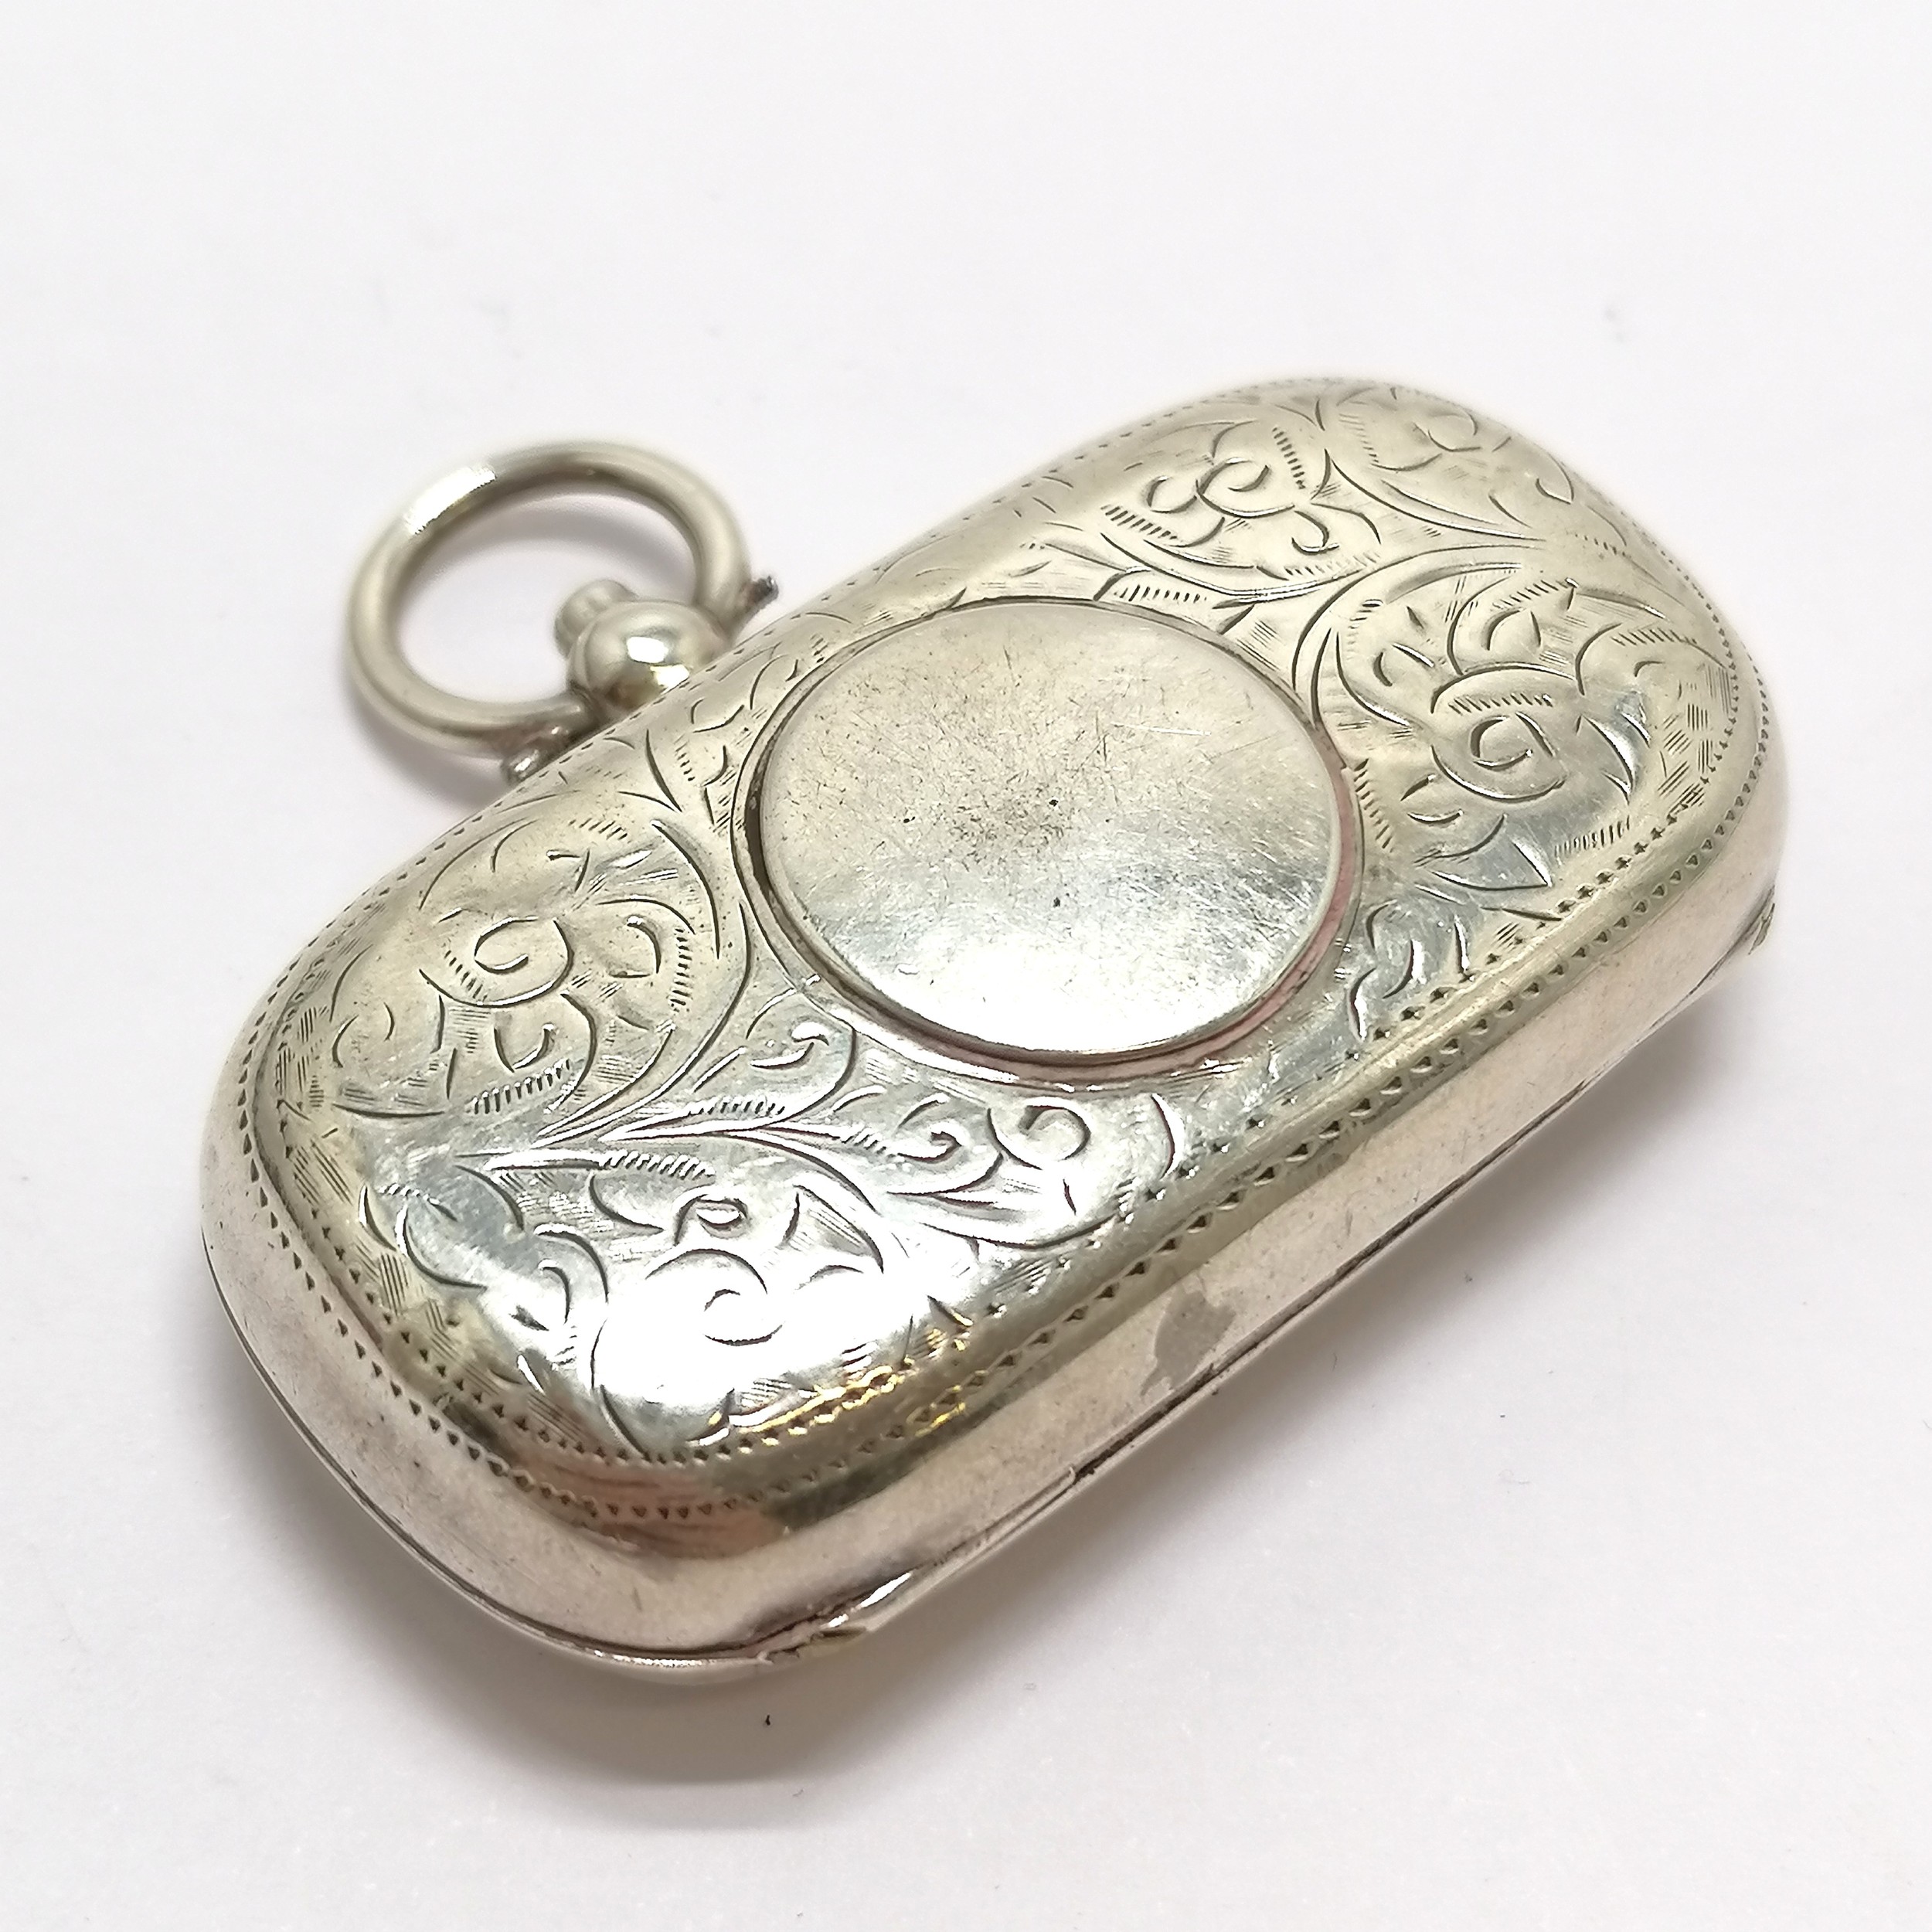 1909 Chester silver double sovereign holder by James Deakin & Sons - 5.2cm across & 27g total weight - Image 2 of 2